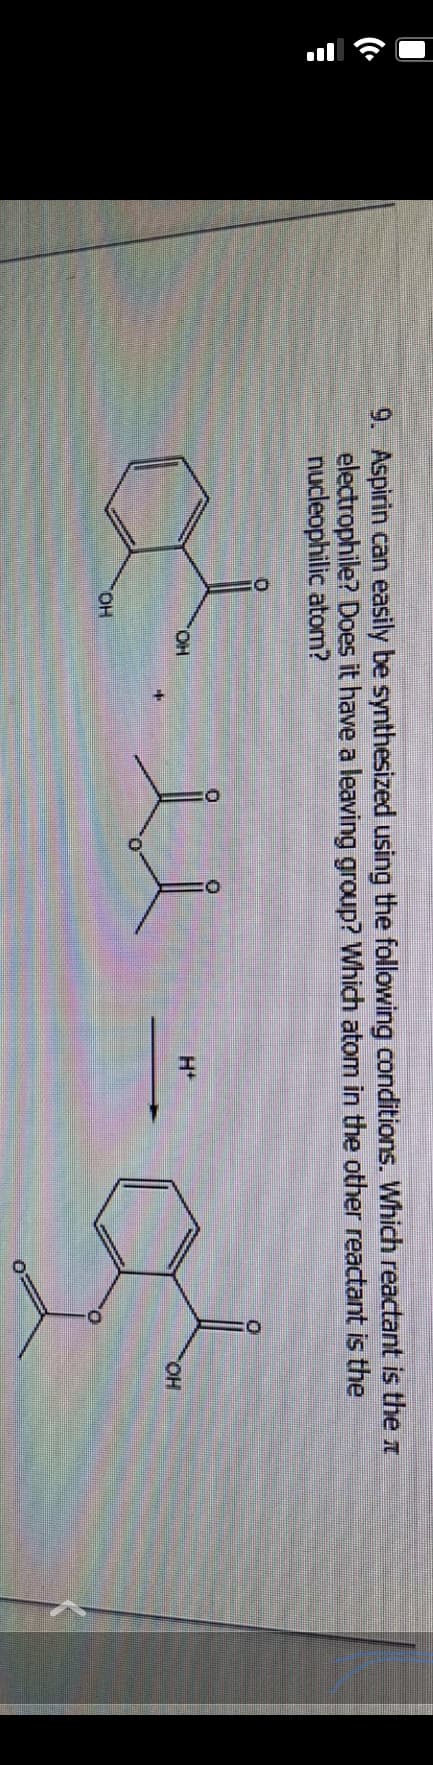 9. Aspirin can easily be synthesized using the following conditions. Which reactant is the
electrophile? Does it have a leaving group? Which atom in the other reactant is the
nucleophilic atom?
D
dise
TOH
OH
H+
OH